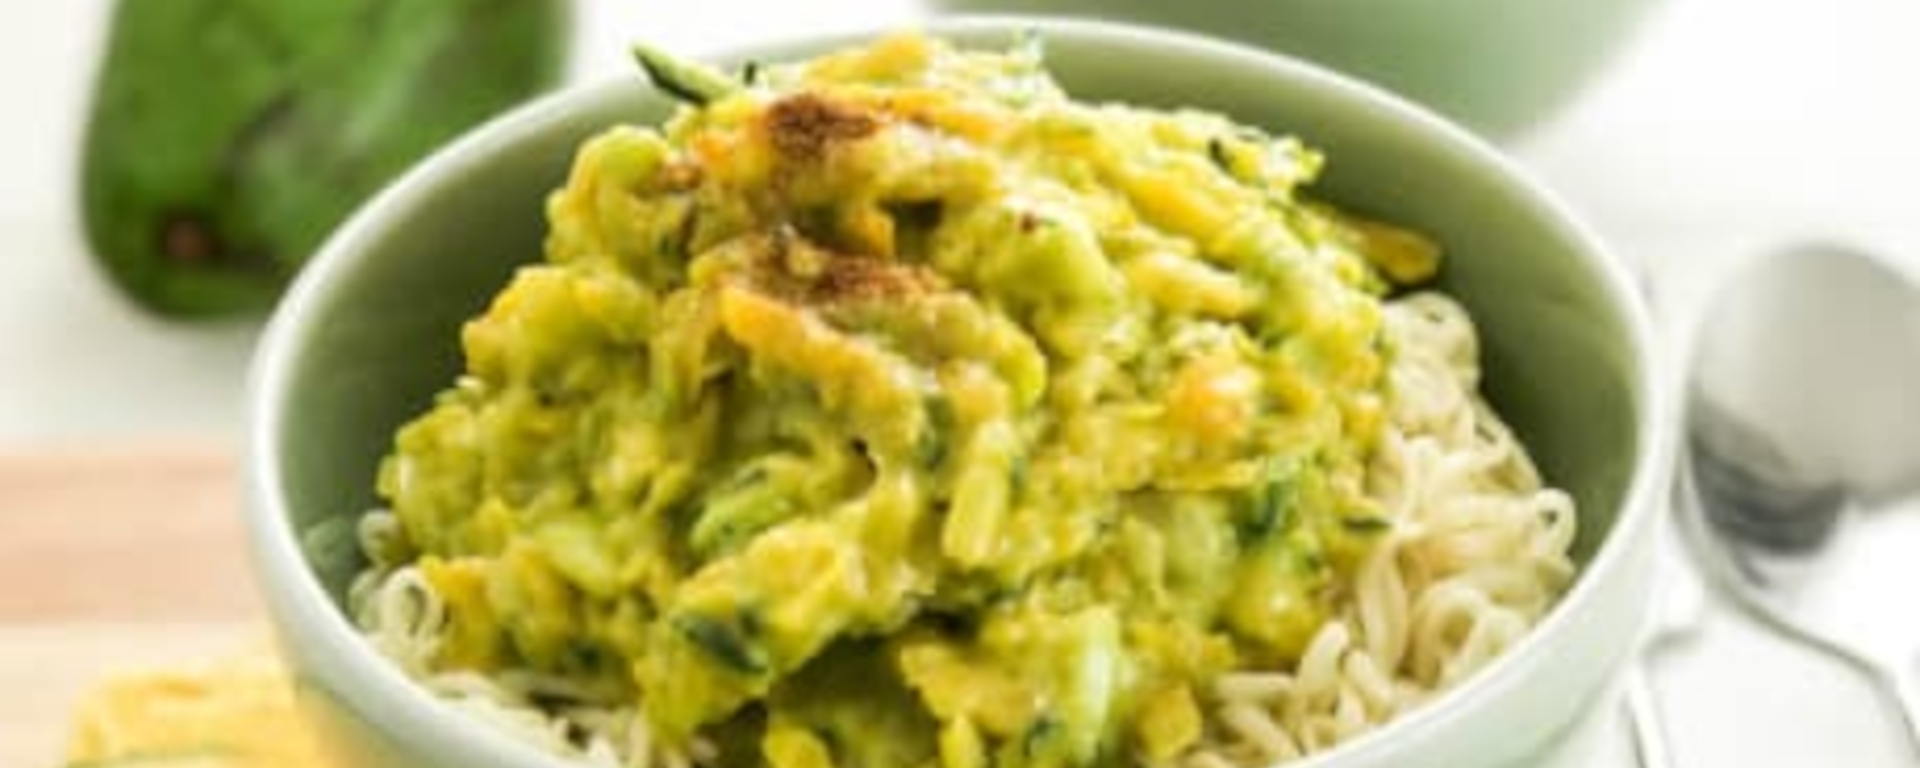 Japanese Noodles with Creamy Pumpkin and Avocado Sauce